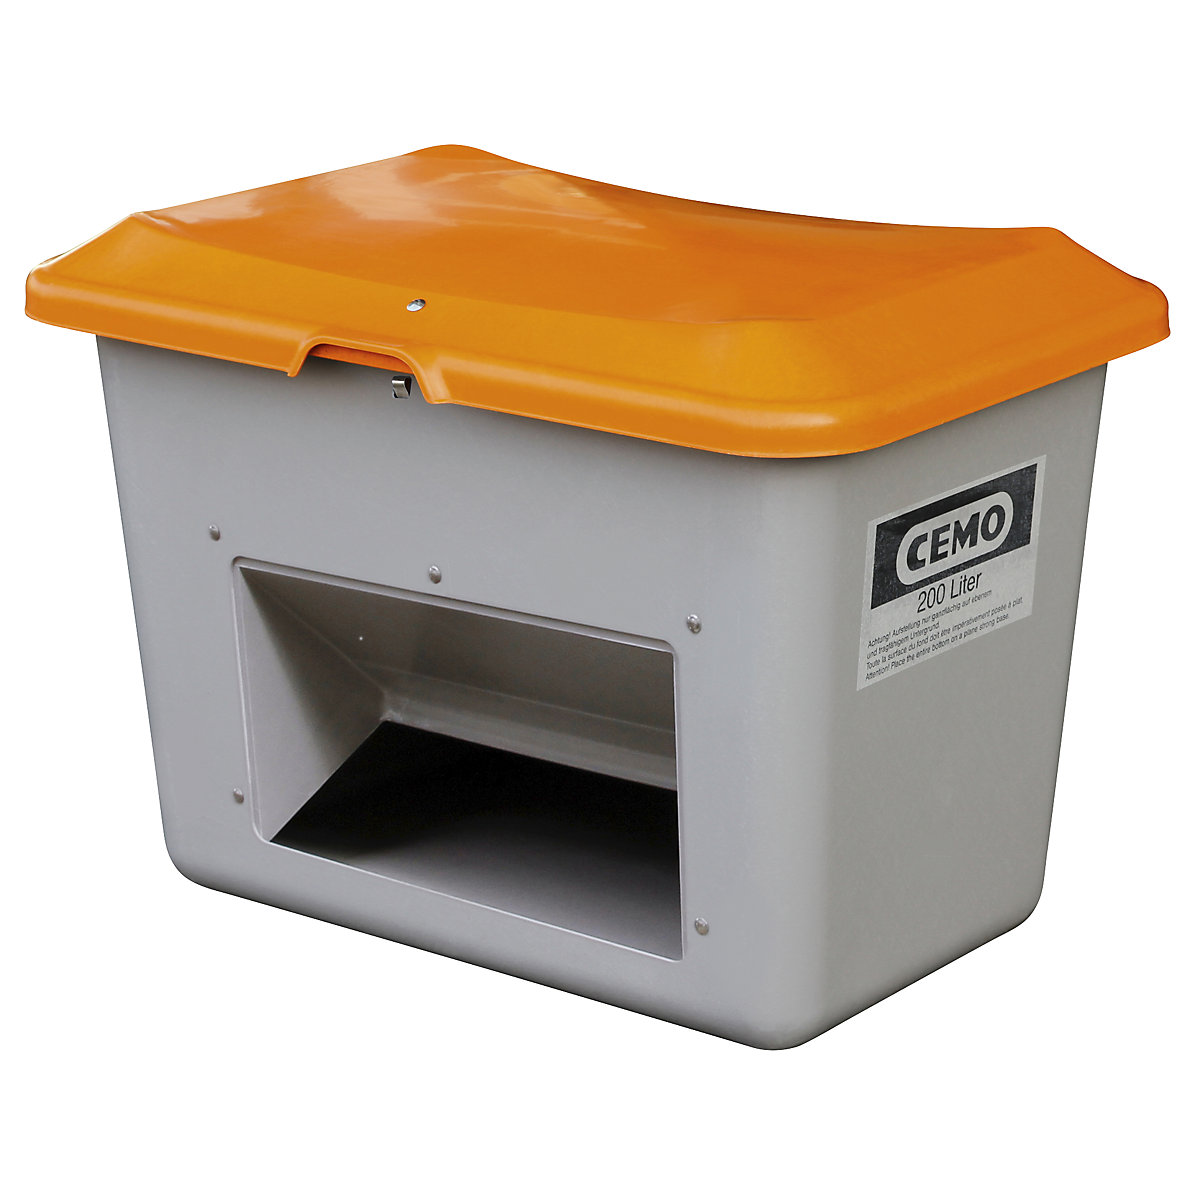 Grit container made of GRP – CEMO, capacity 200 l, with dispenser opening, grey container-4